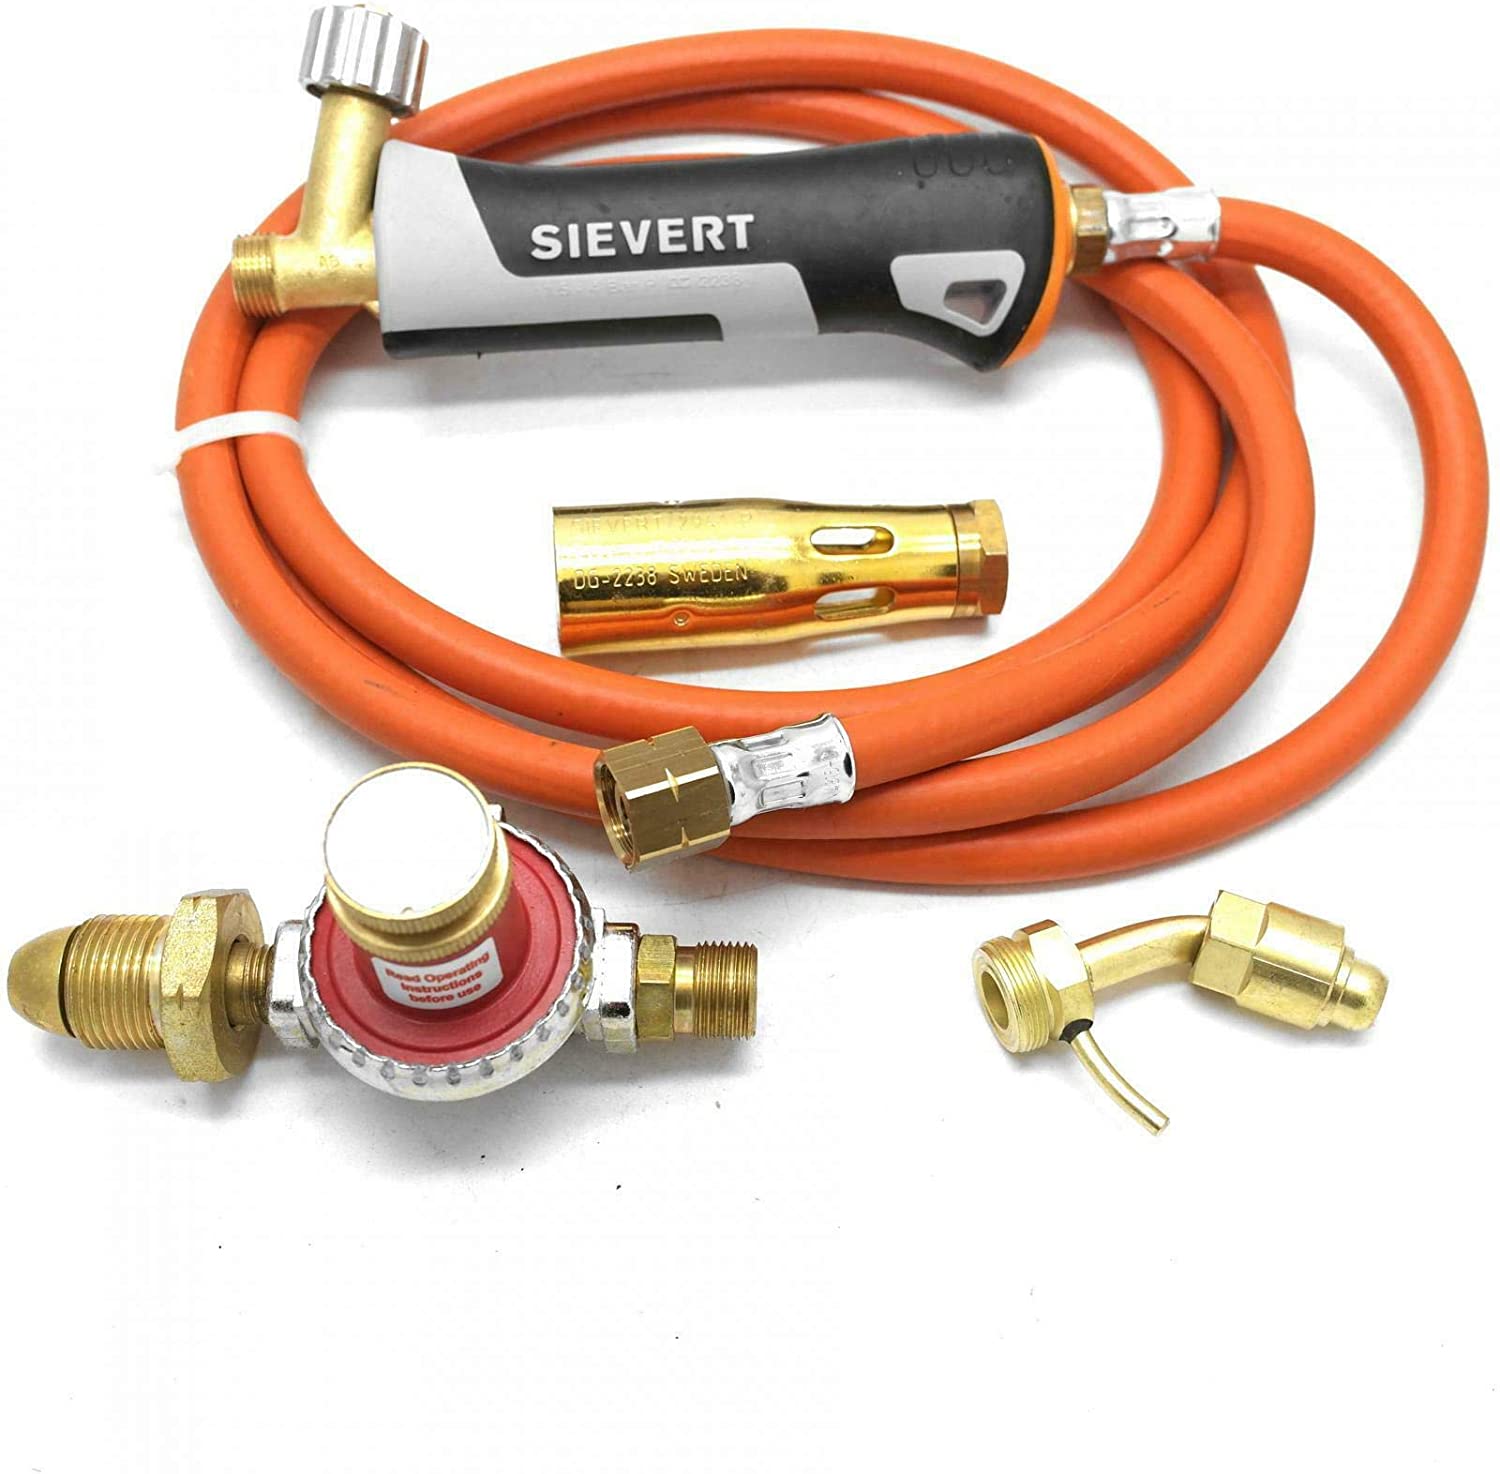 Sievert Pro 86 torch kit with regulator and 2m hose